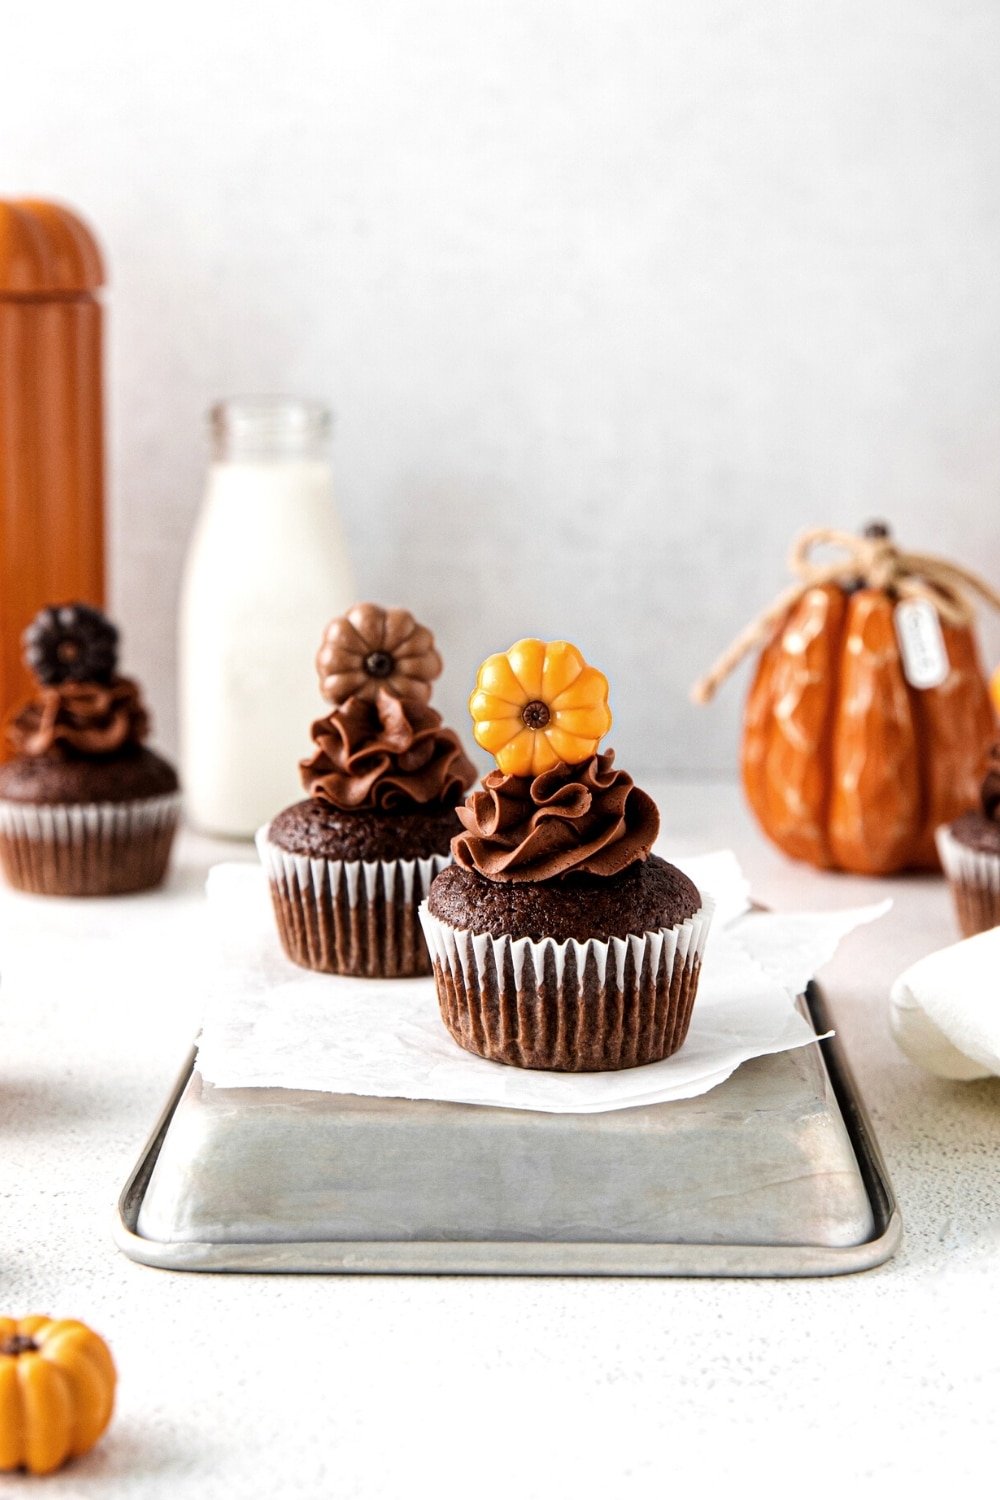 Three chocolate-pumpkin Thanksgiving cupcakes with chocolate buttercream frosting and decorative pumpkin cupcake toppers.